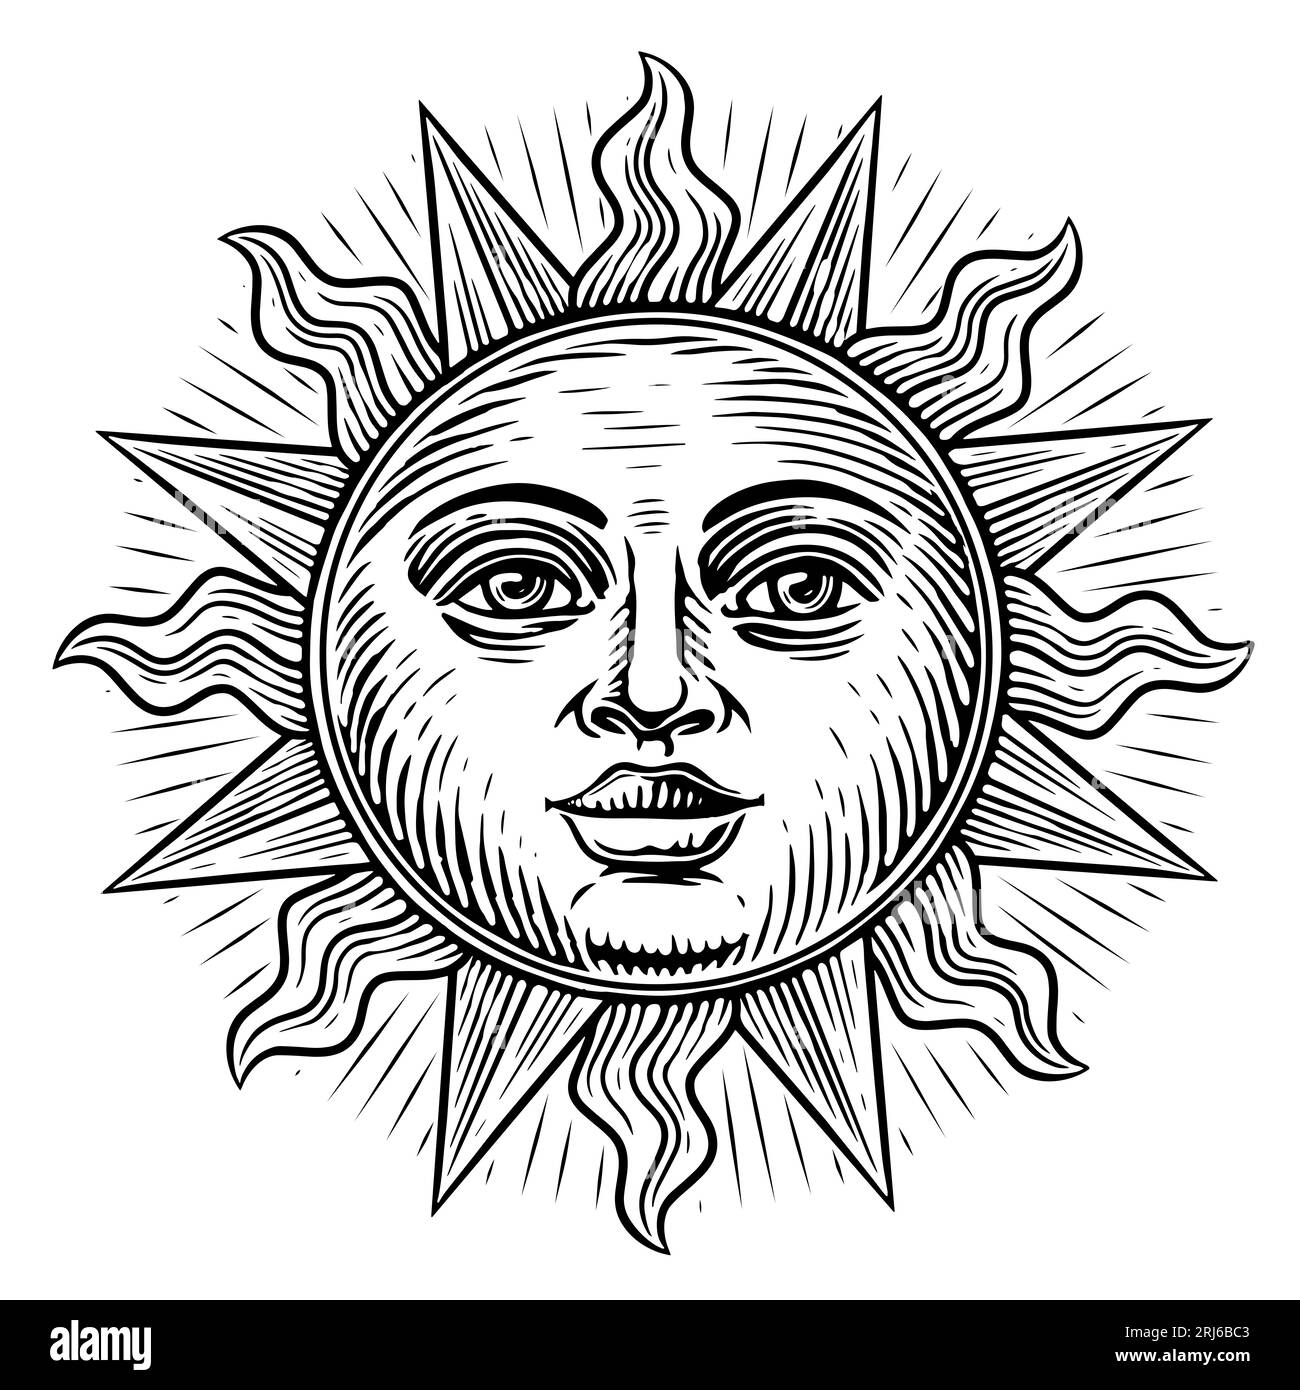 Glowing sun with a face. Hand drawn illustration in boho style for mystical design, tarot cards, tattoo and sticker Stock Photo